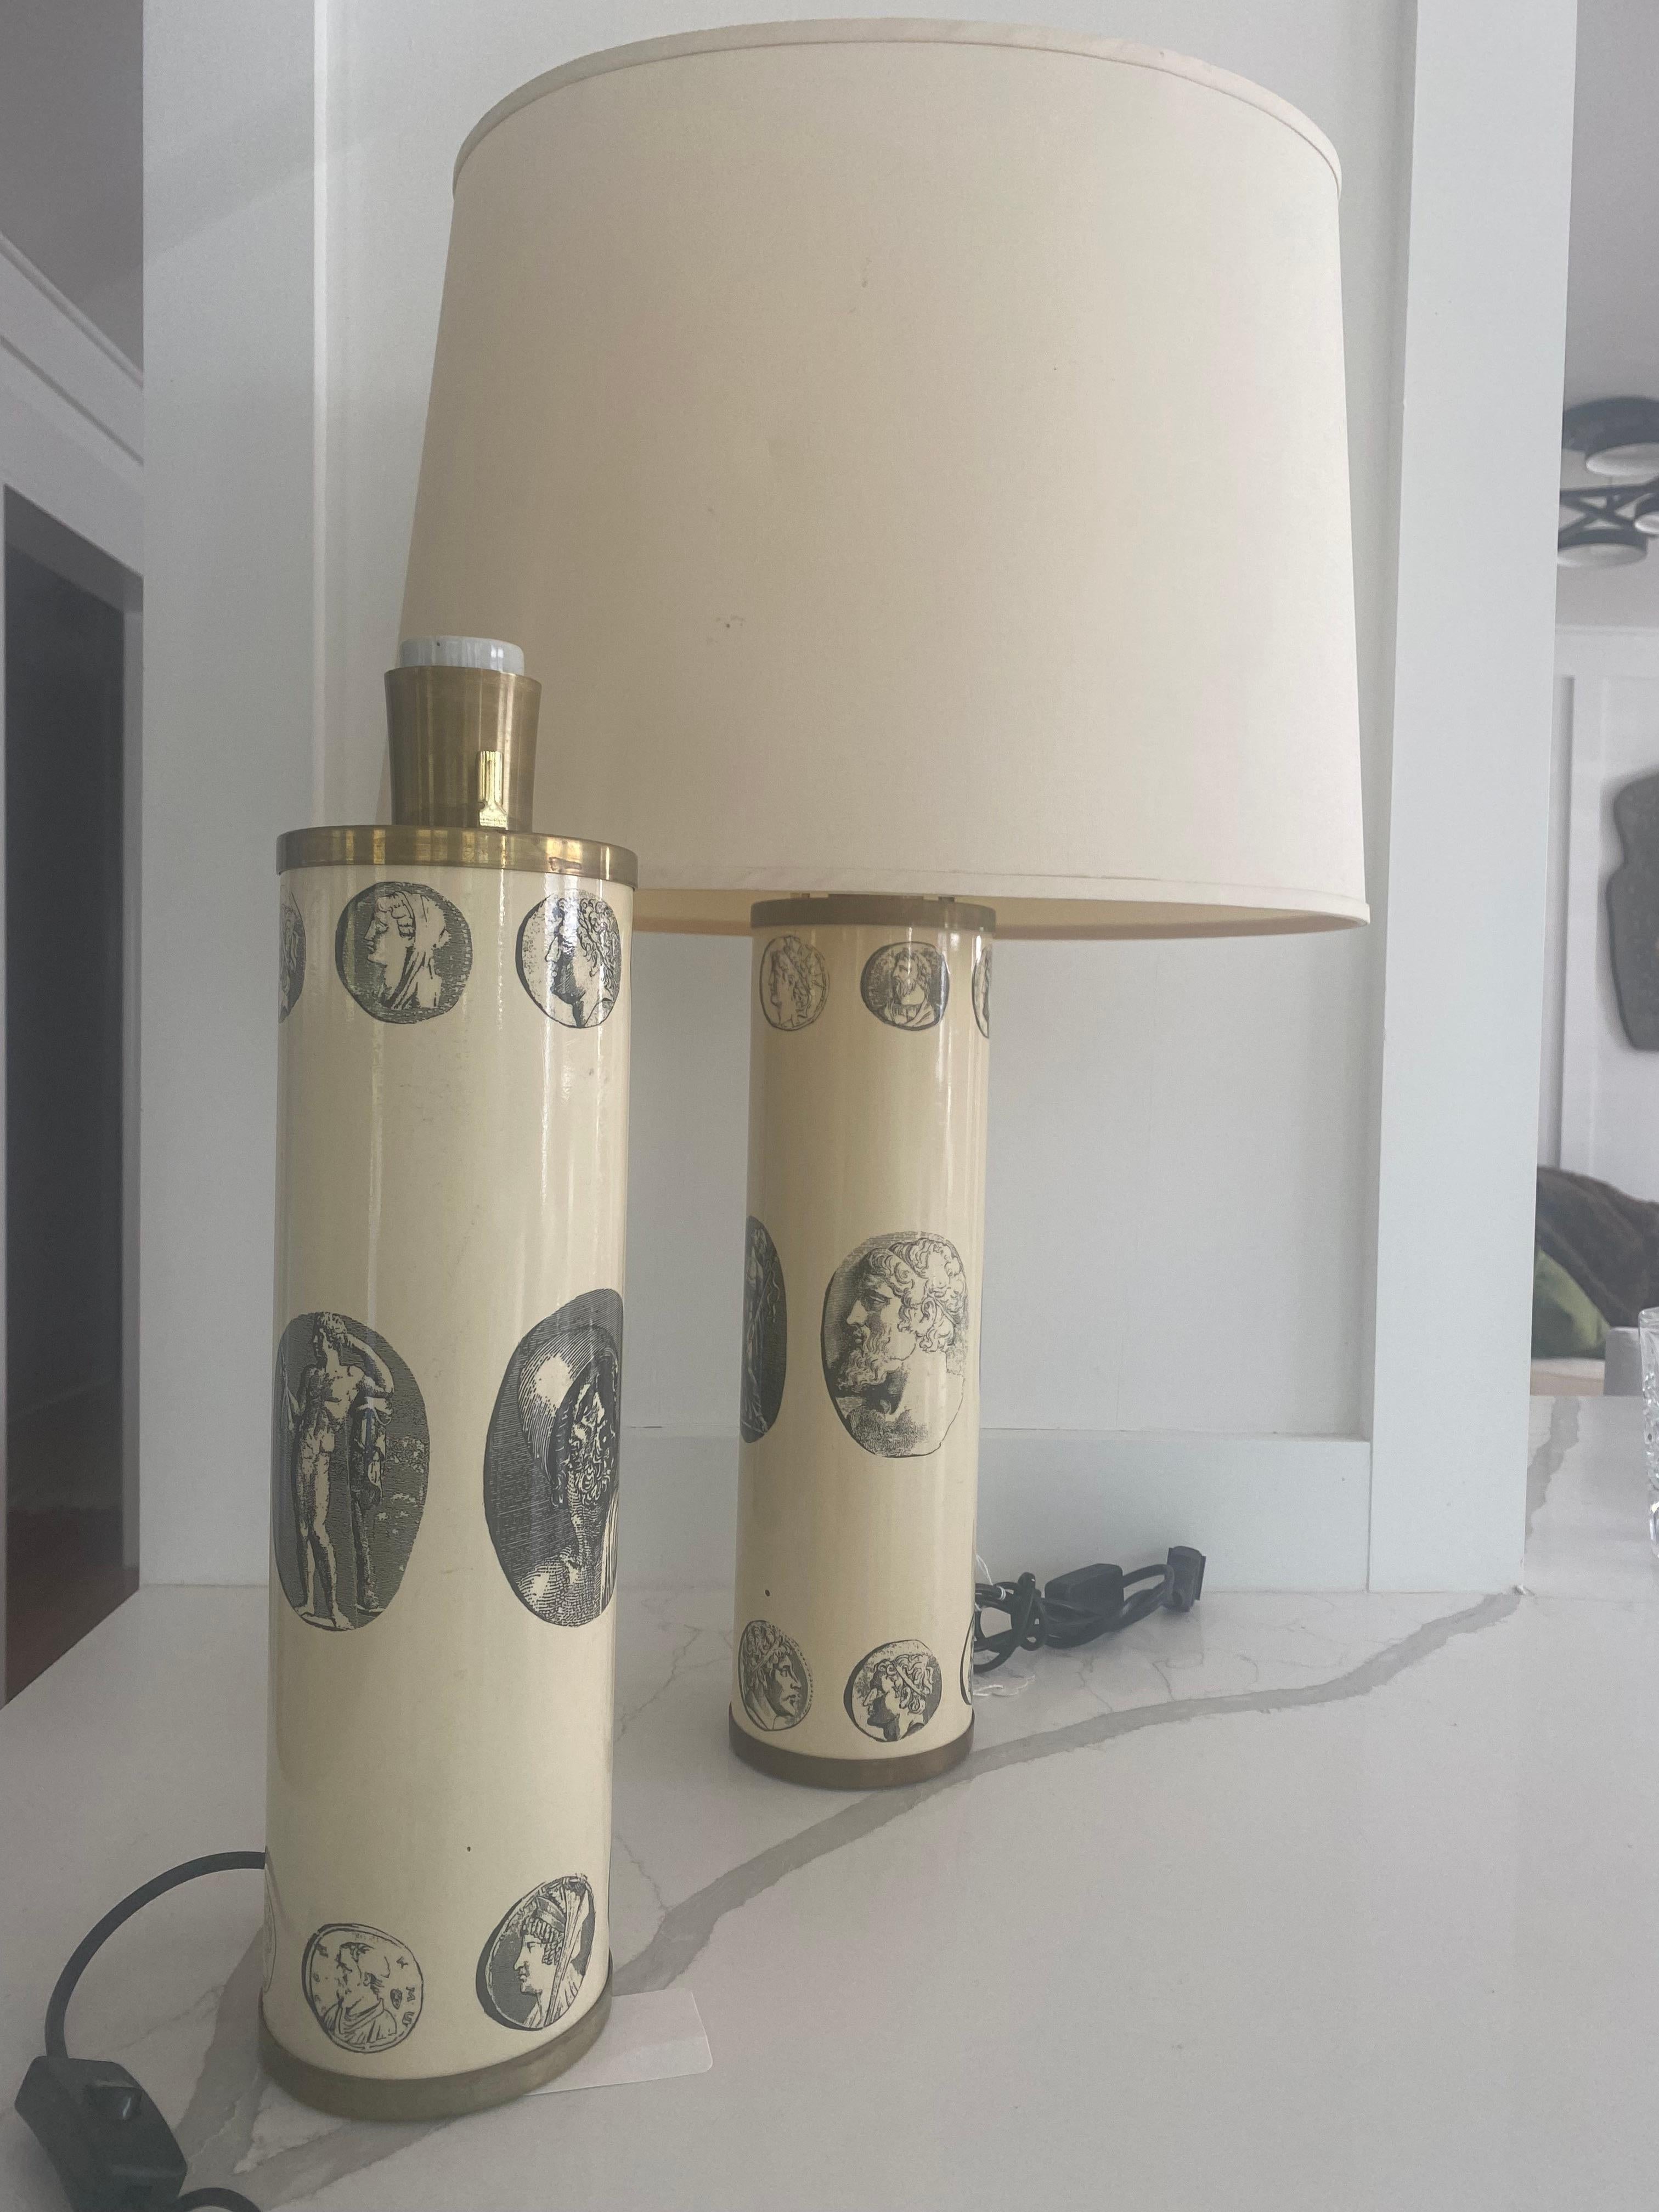 Pair of Fornasetti Table Lamps Cammei Cameo Black with White Italy Midcentury  For Sale 2